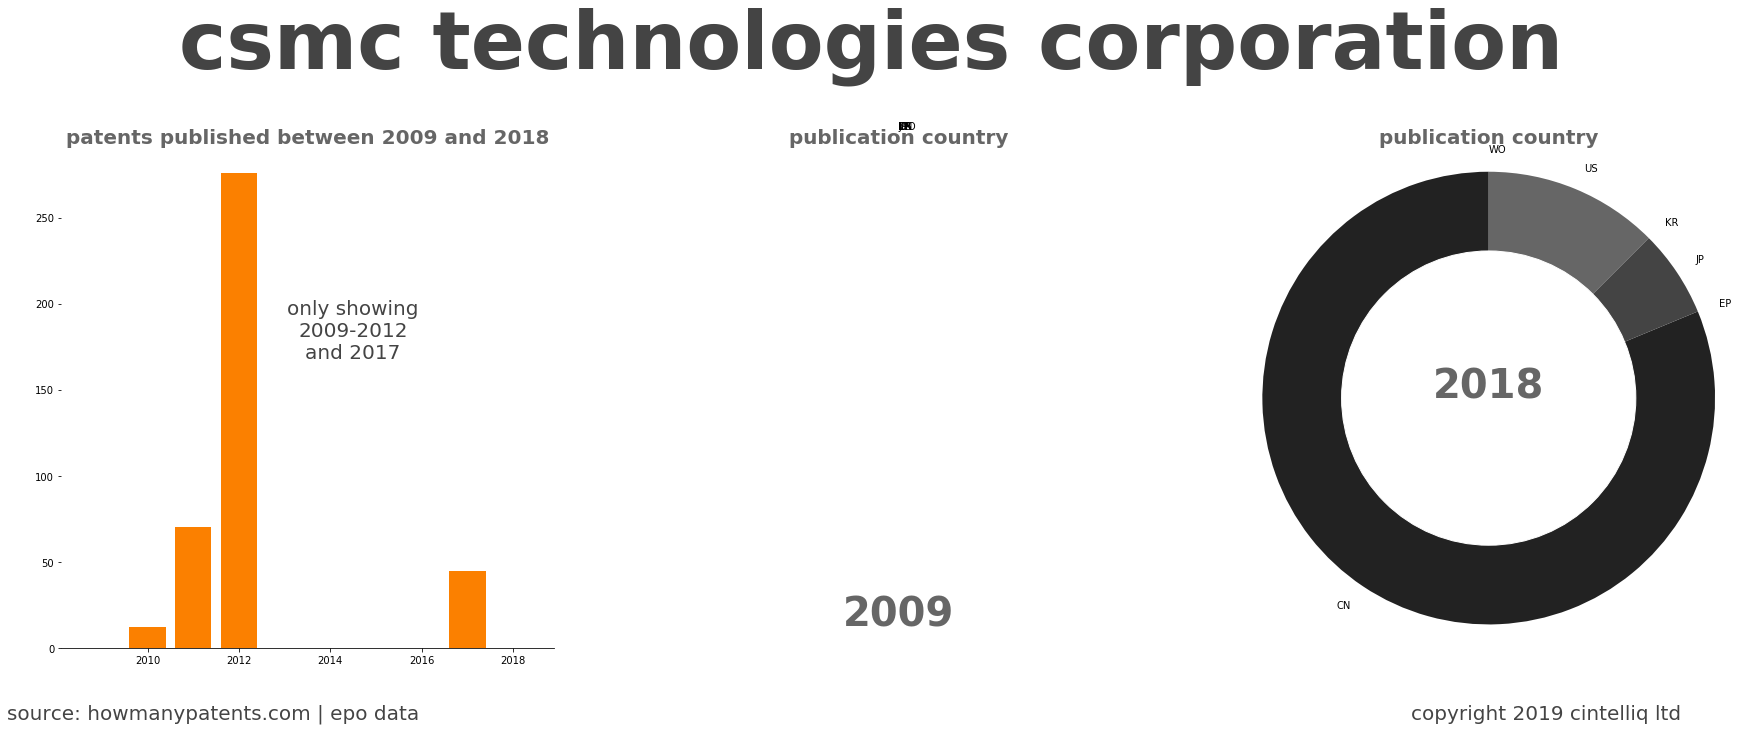 summary of patents for Csmc Technologies Corporation